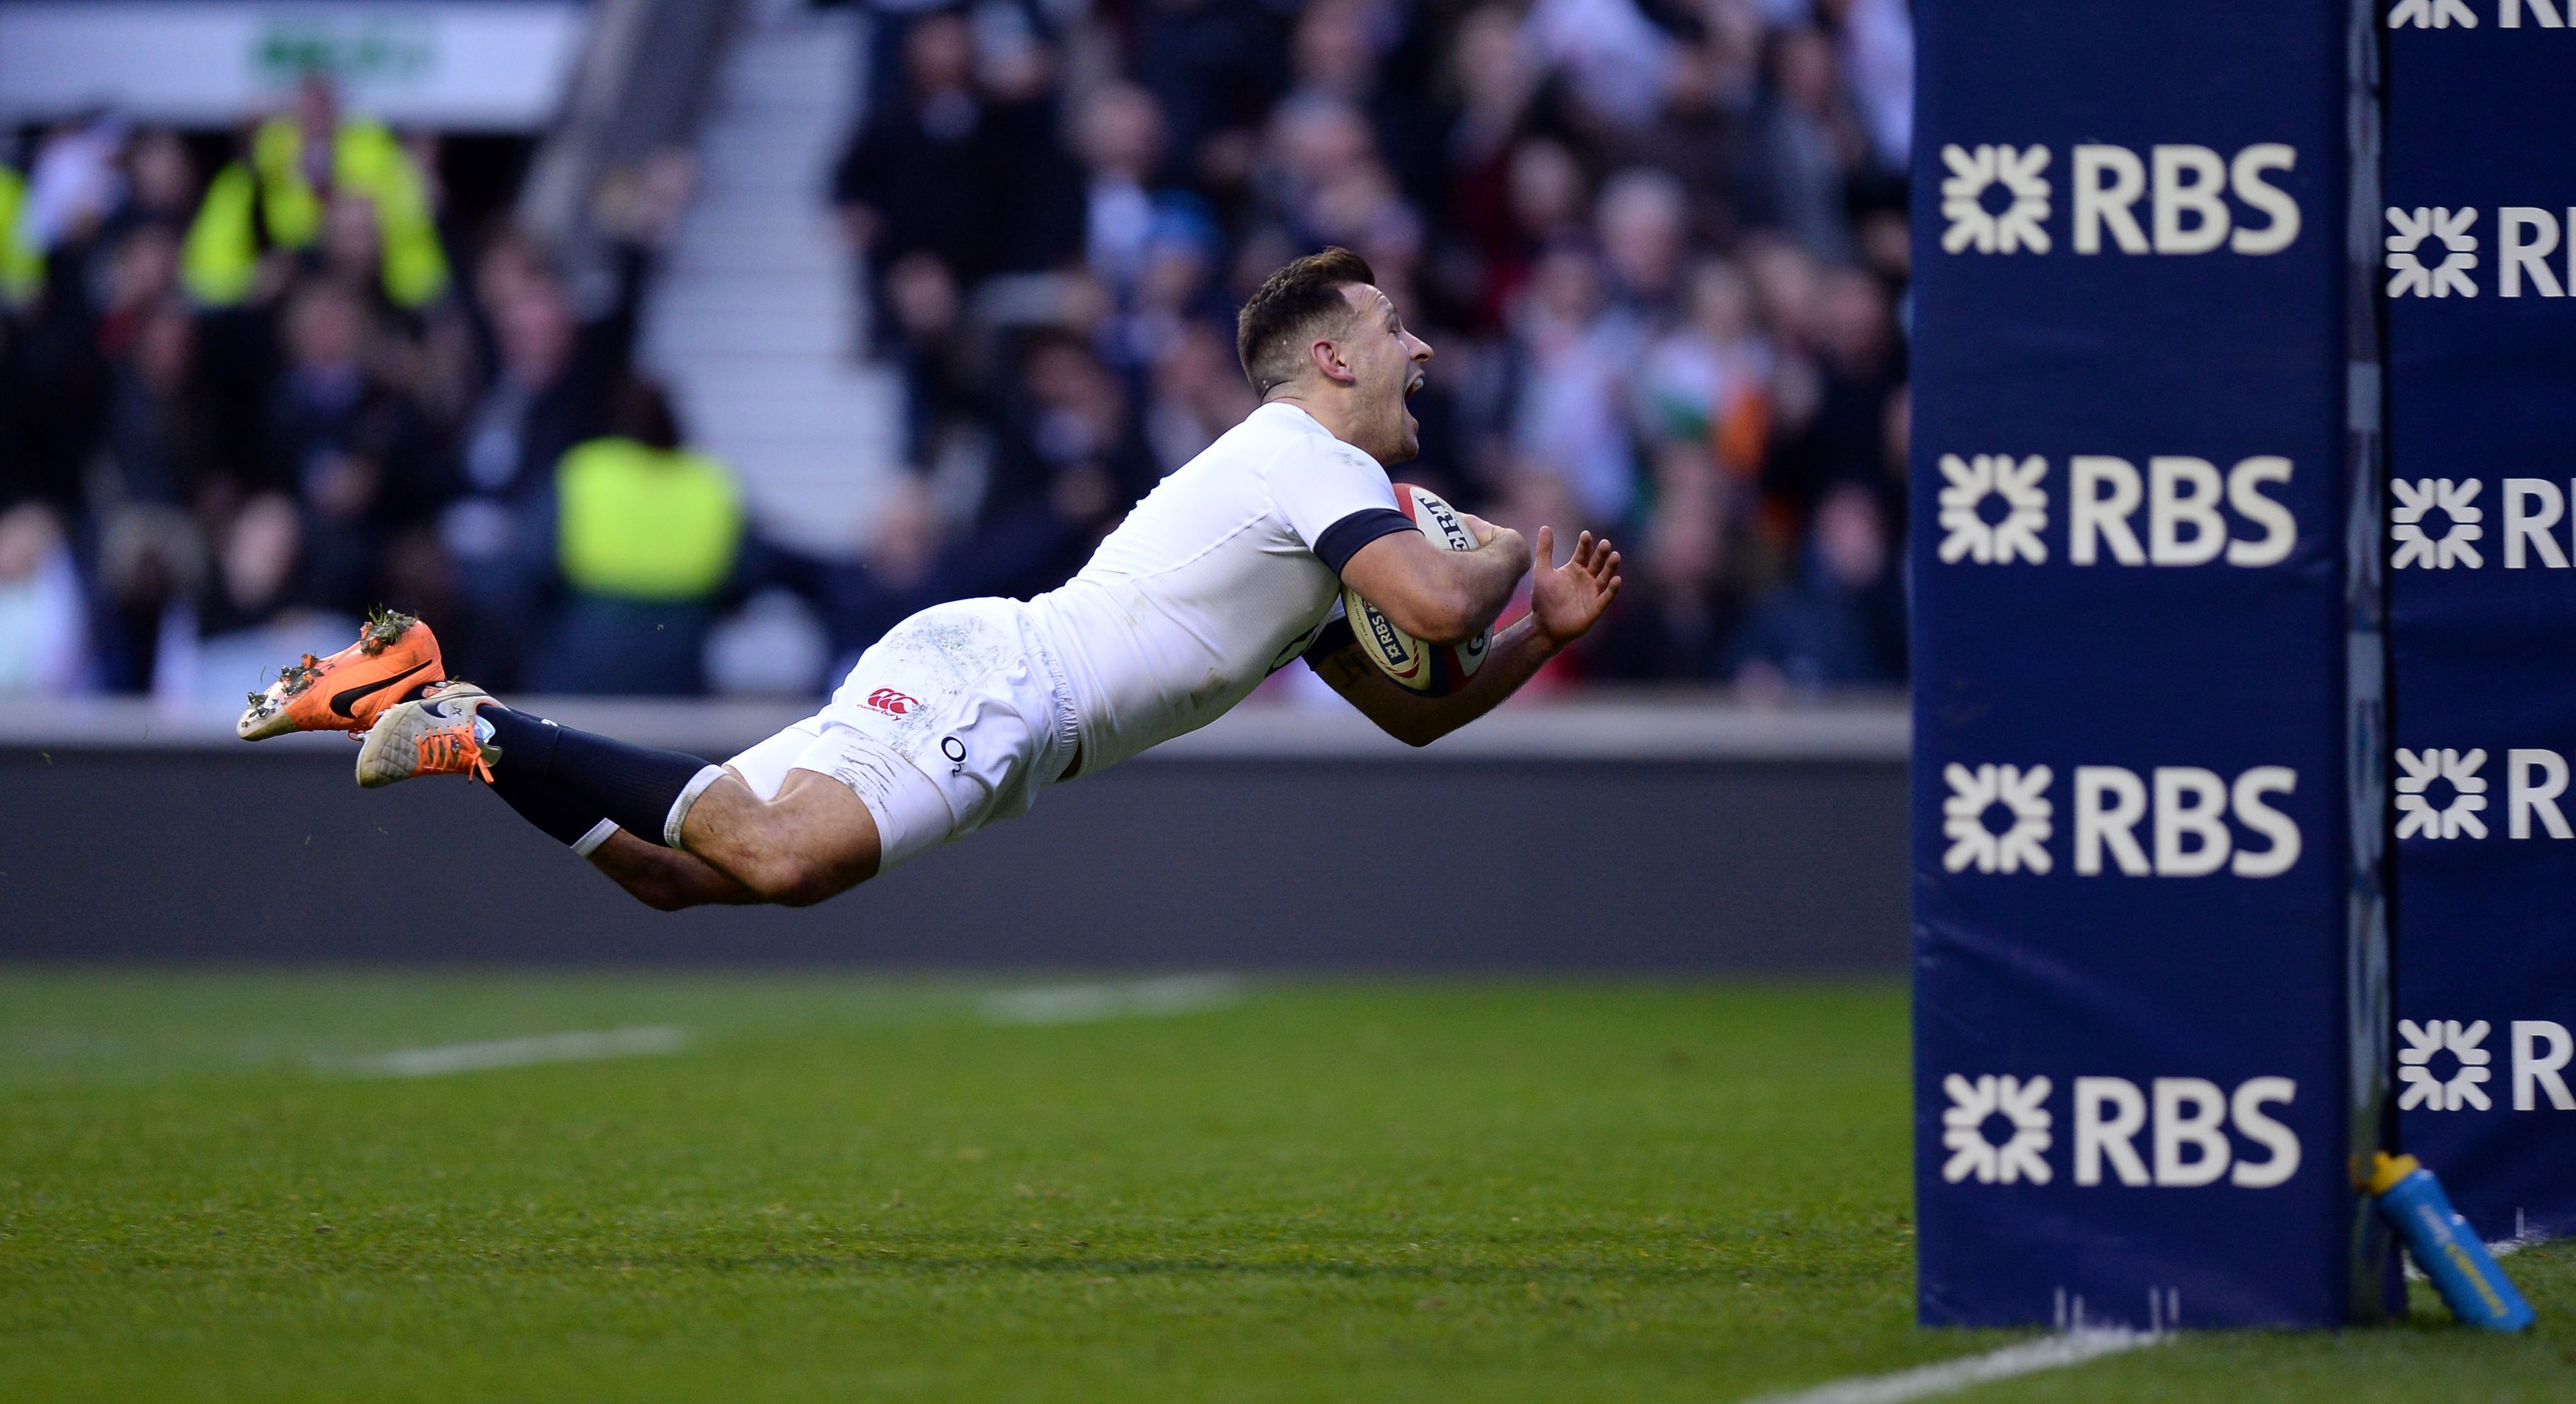 England's Danny Care dives in to score against Ireland in their Six Nations clash at Twickenham on Saturday. Photo: AP